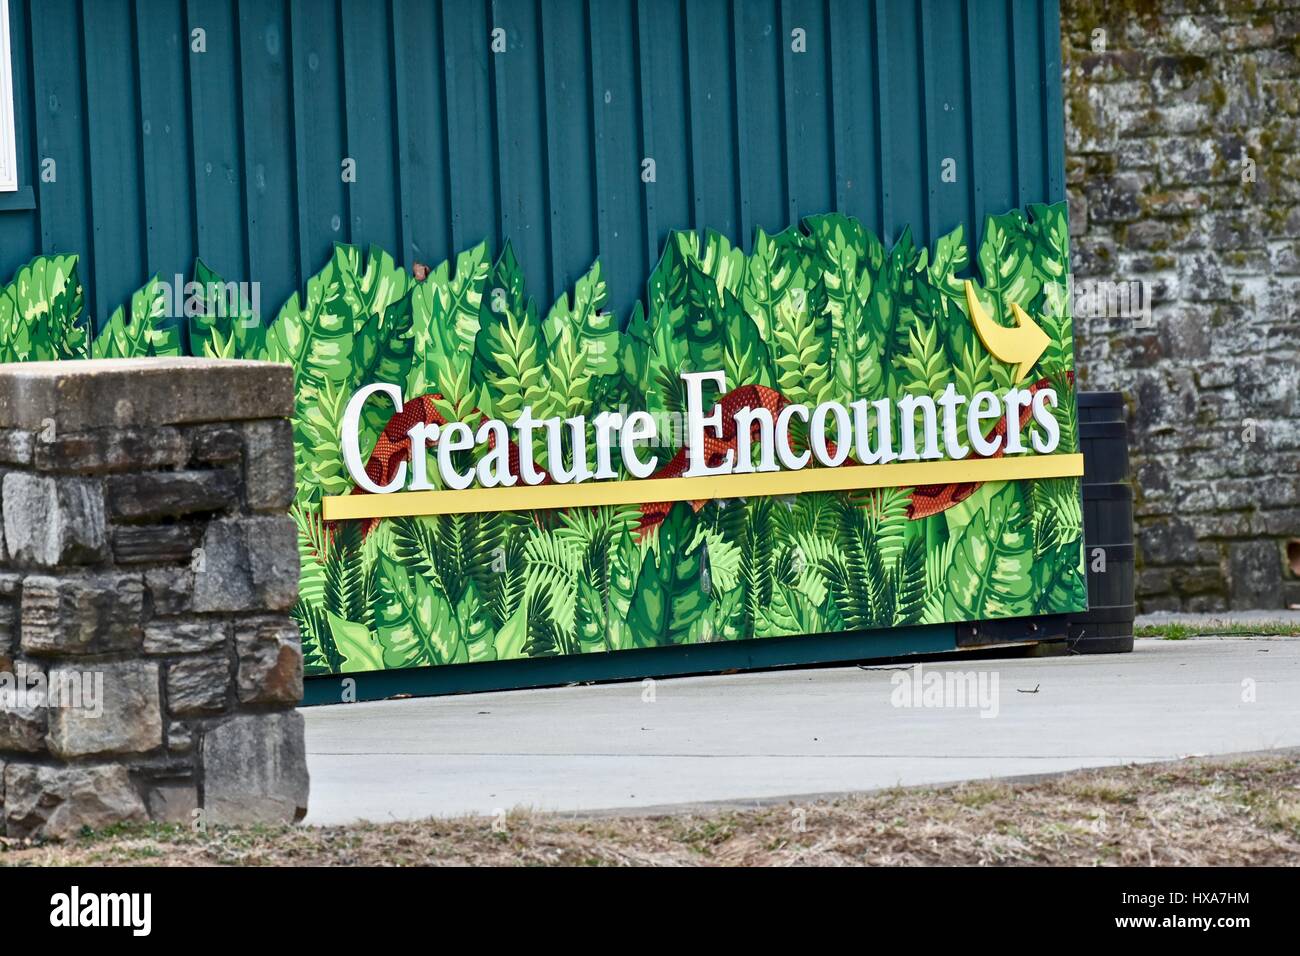 Creature encounters building at Maryland zoo Stock Photo